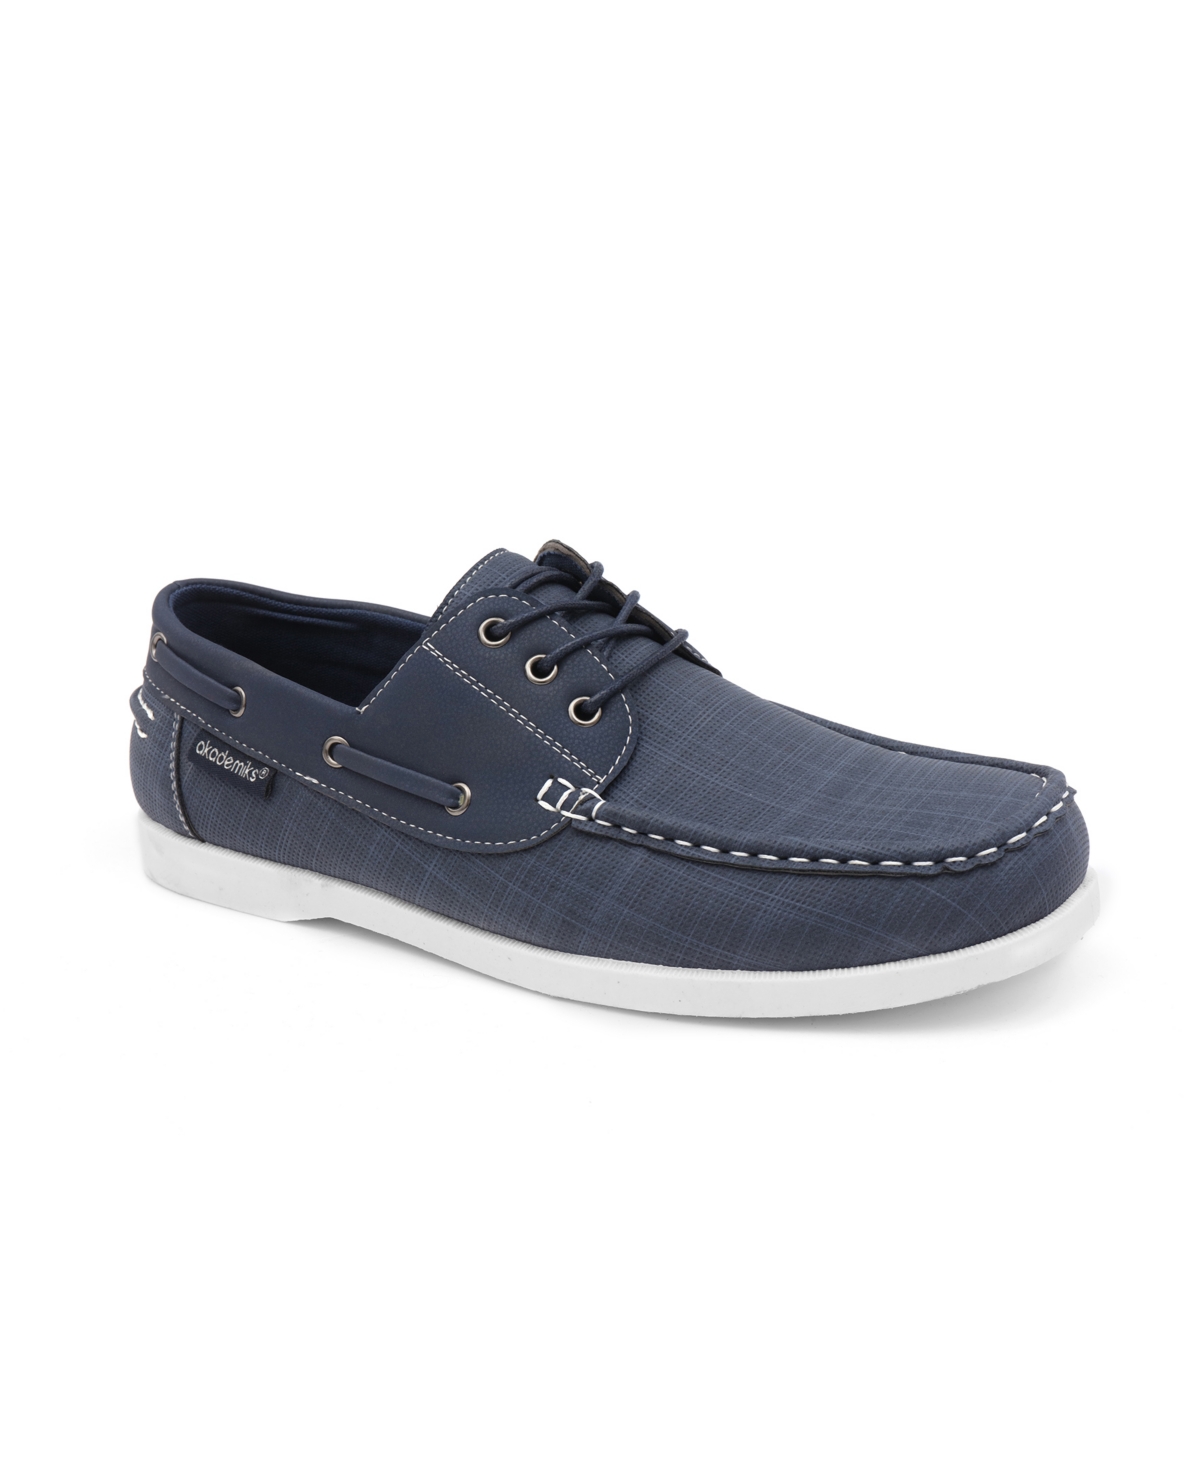 Akademiks Men's Marina 2.0 Lace-up Boat Shoes In Navy